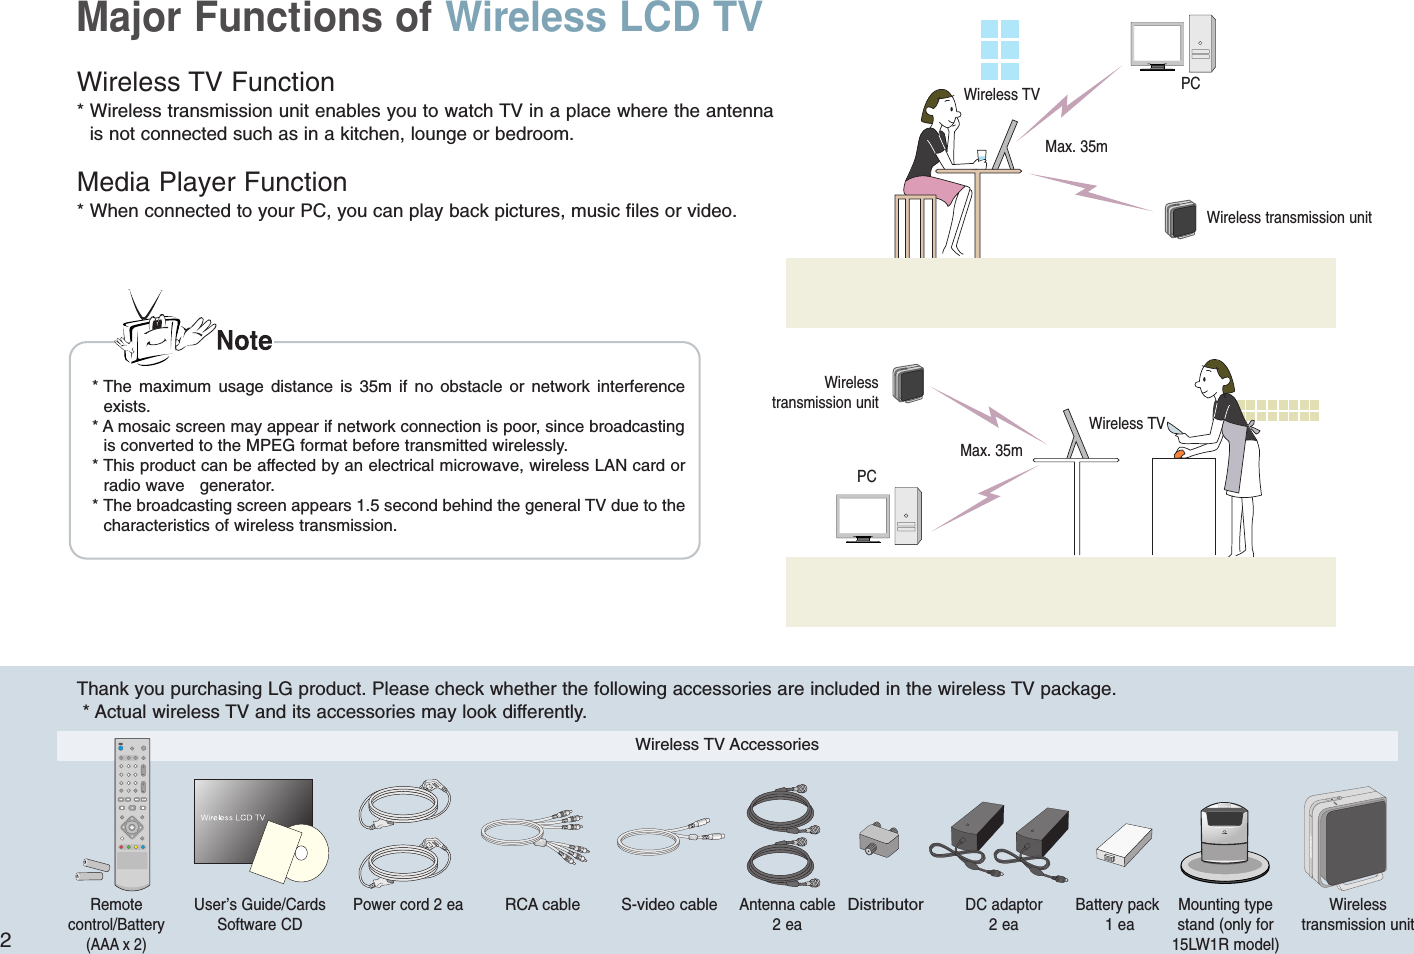 2Major Functions of Wireless LCD TVWireless TV Function * Wireless transmission unit enables you to watch TV in a place where the antennais not connected such as in a kitchen, lounge or bedroom.Media Player Function* When connected to your PC, you can play back pictures, music files or video.Thank you purchasing LG product. Please check whether the following accessories are included in the wireless TV package.* Actual wireless TV and its accessories may look differently.* The maximum usage distance is 35m if no obstacle or network interferenceexists.* A mosaic screen may appear if network connection is poor, since broadcastingis converted to the MPEG format before transmitted wirelessly.* This product can be affected by an electrical microwave, wireless LAN card orradio wave   generator.* The broadcasting screen appears 1.5 second behind the general TV due to thecharacteristics of wireless transmission.POWERPOWERWireless TVMax. 35mPCWireless transmission unitWireless transmission unitWireless TVMax. 35mPCWireless TV AccessoriesRemote control/Battery(AAA x 2)User’s Guide/CardsSoftware CDPower cord 2 eaRCA cable S-video cableAntenna cable2 eaDistributorDC adaptor 2 eaBattery pack1 eaMounting typestand (only for15LW1R model)Wireless transmission unit